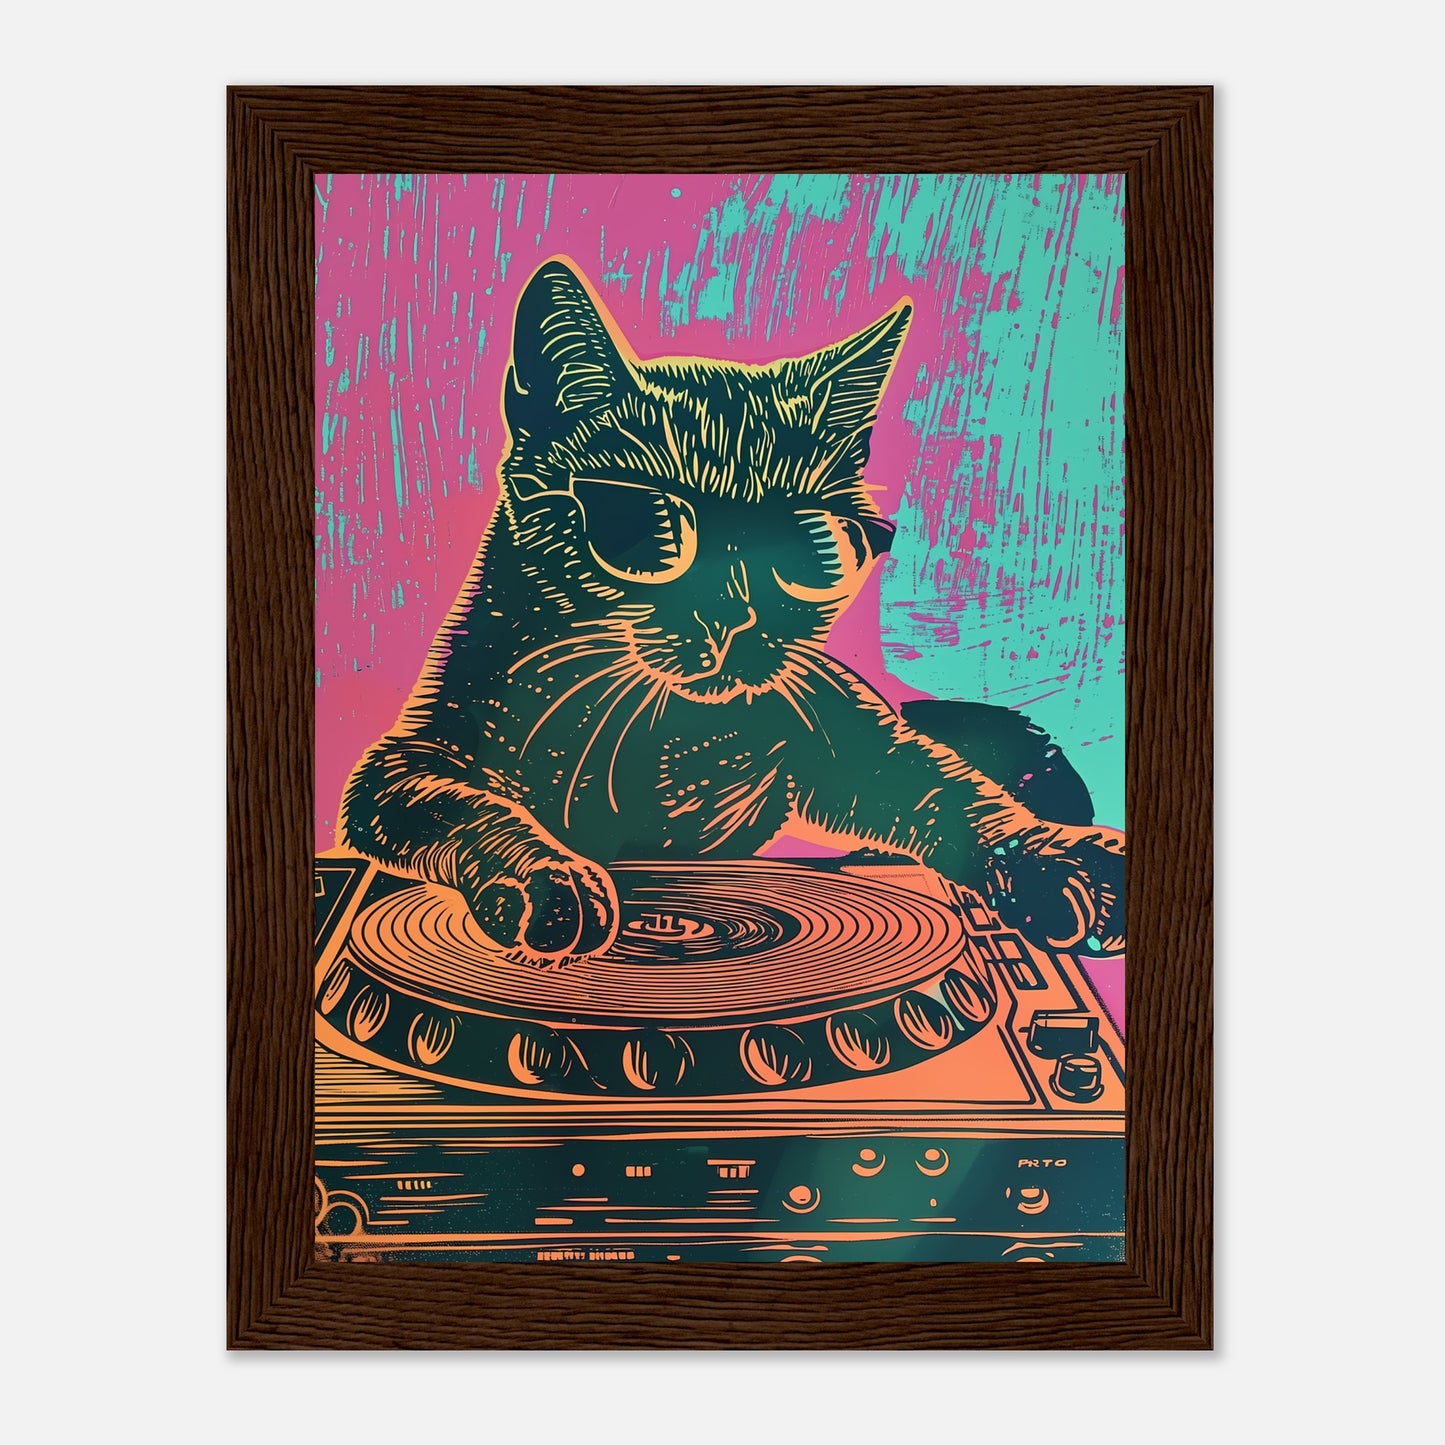 Colorful illustration of a cat DJing on a turntable, framed as artwork.